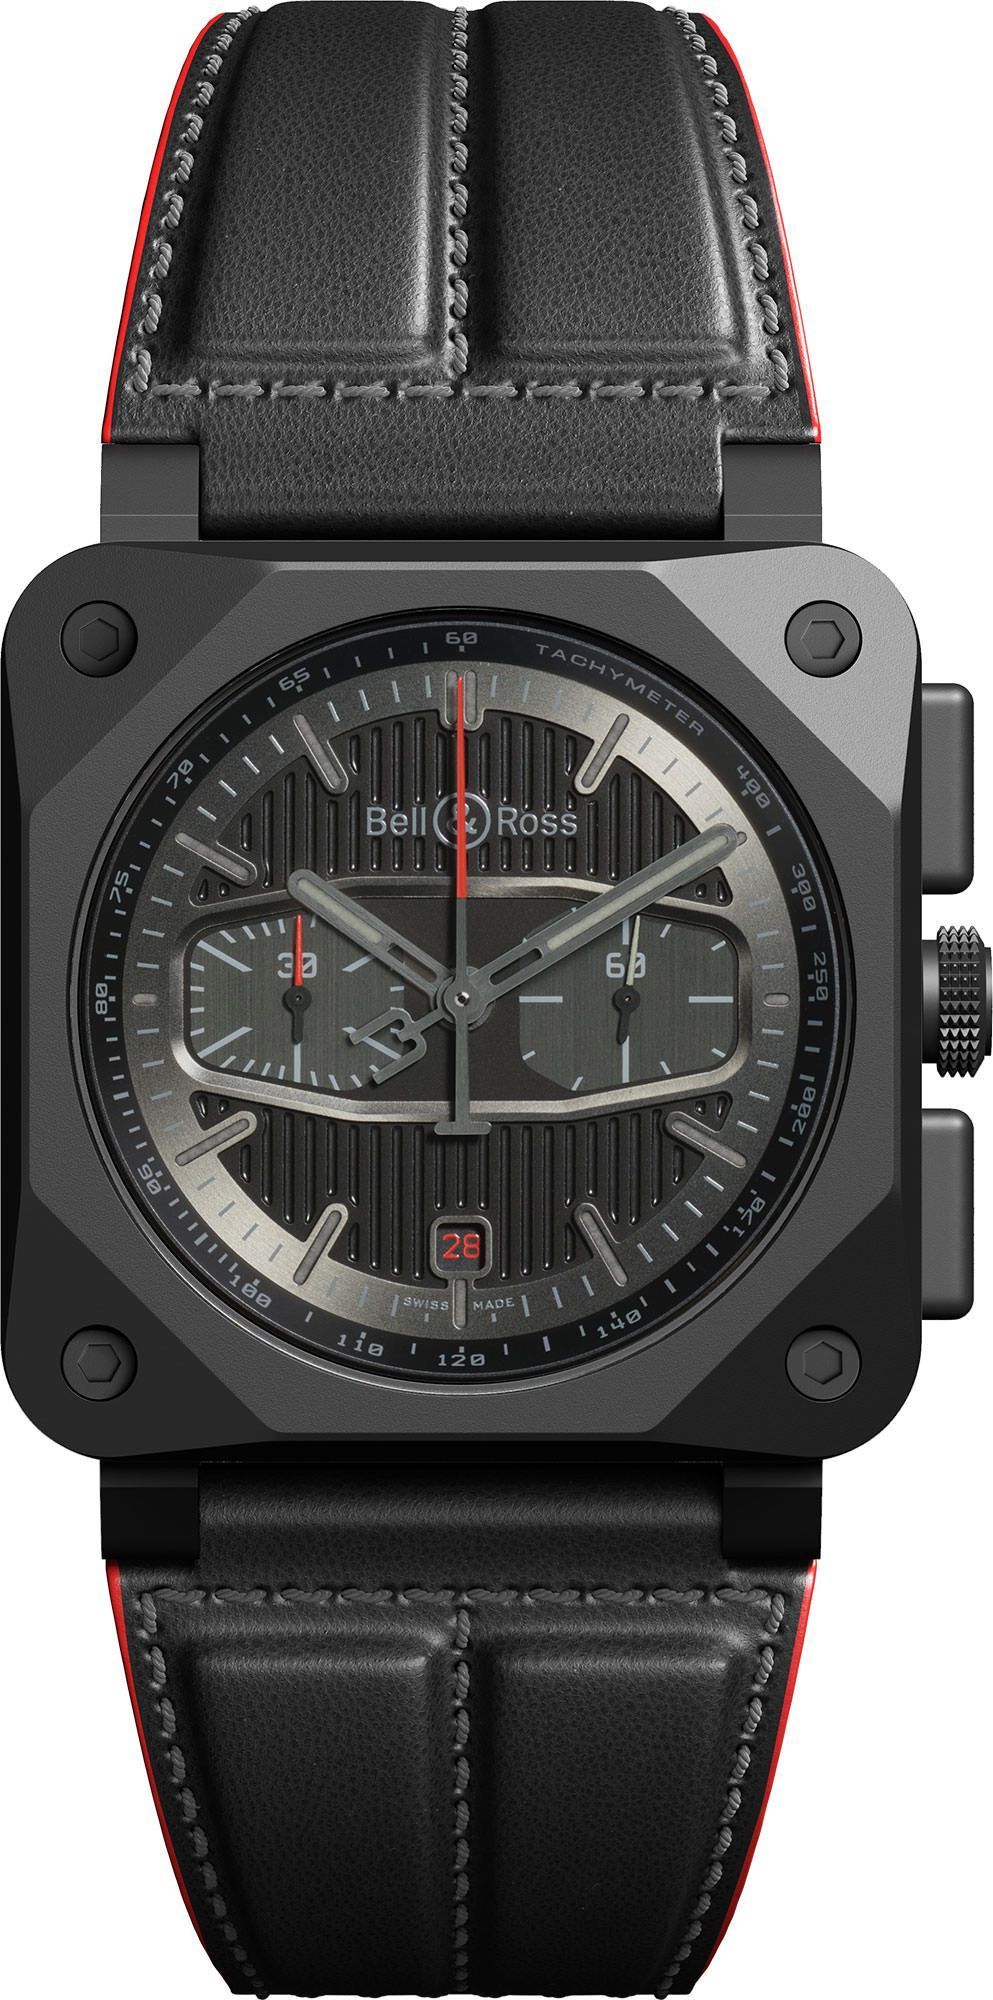 Bell & Ross Instruments BR 03 Chrono Black Dial 42 mm Automatic Watch For Men - 1